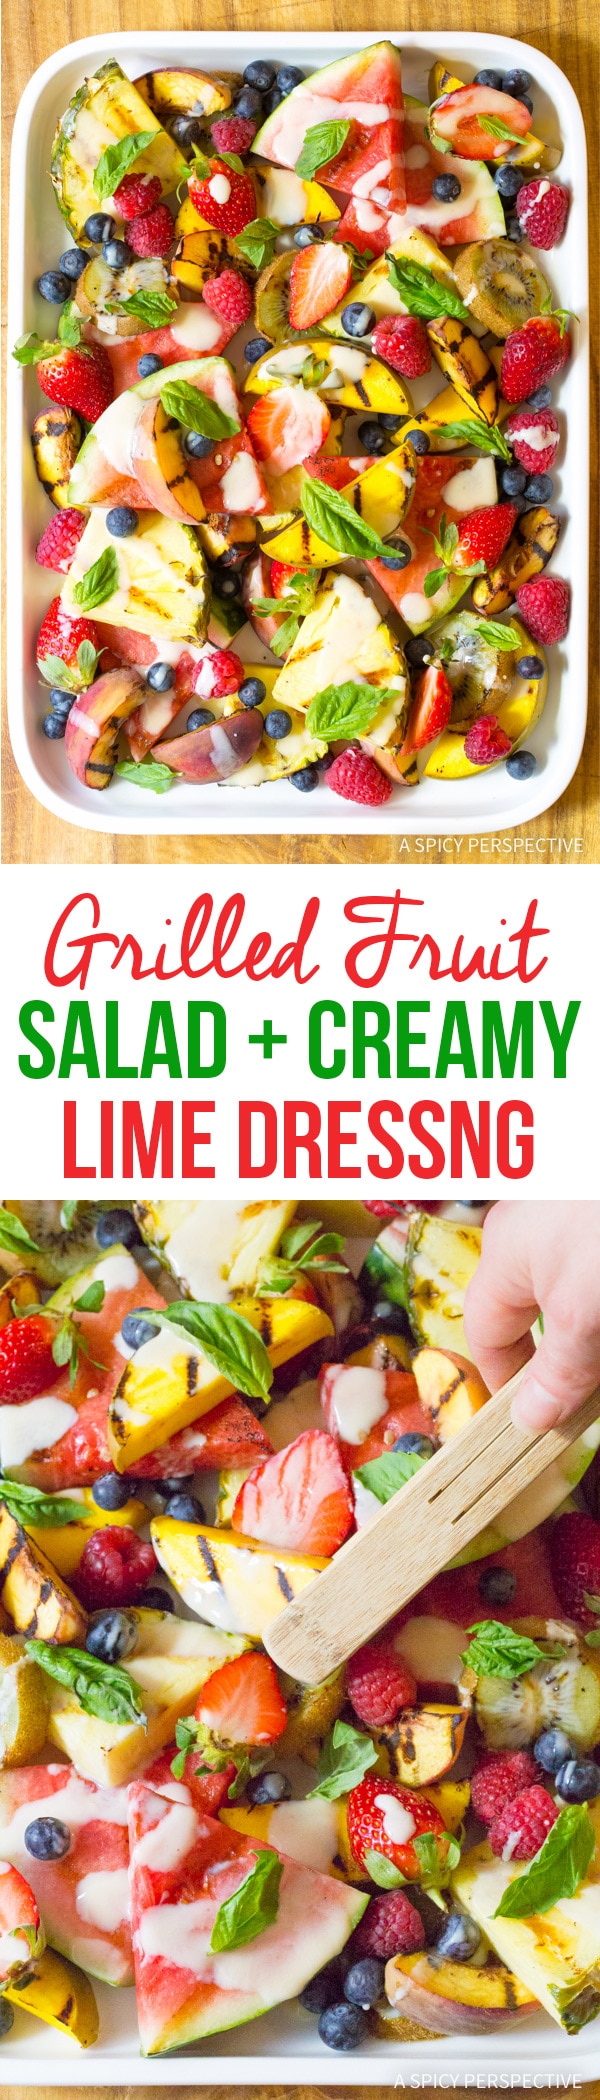 Tangy Grilled Fruit Salad with Creamy Lime Dressing Recipe